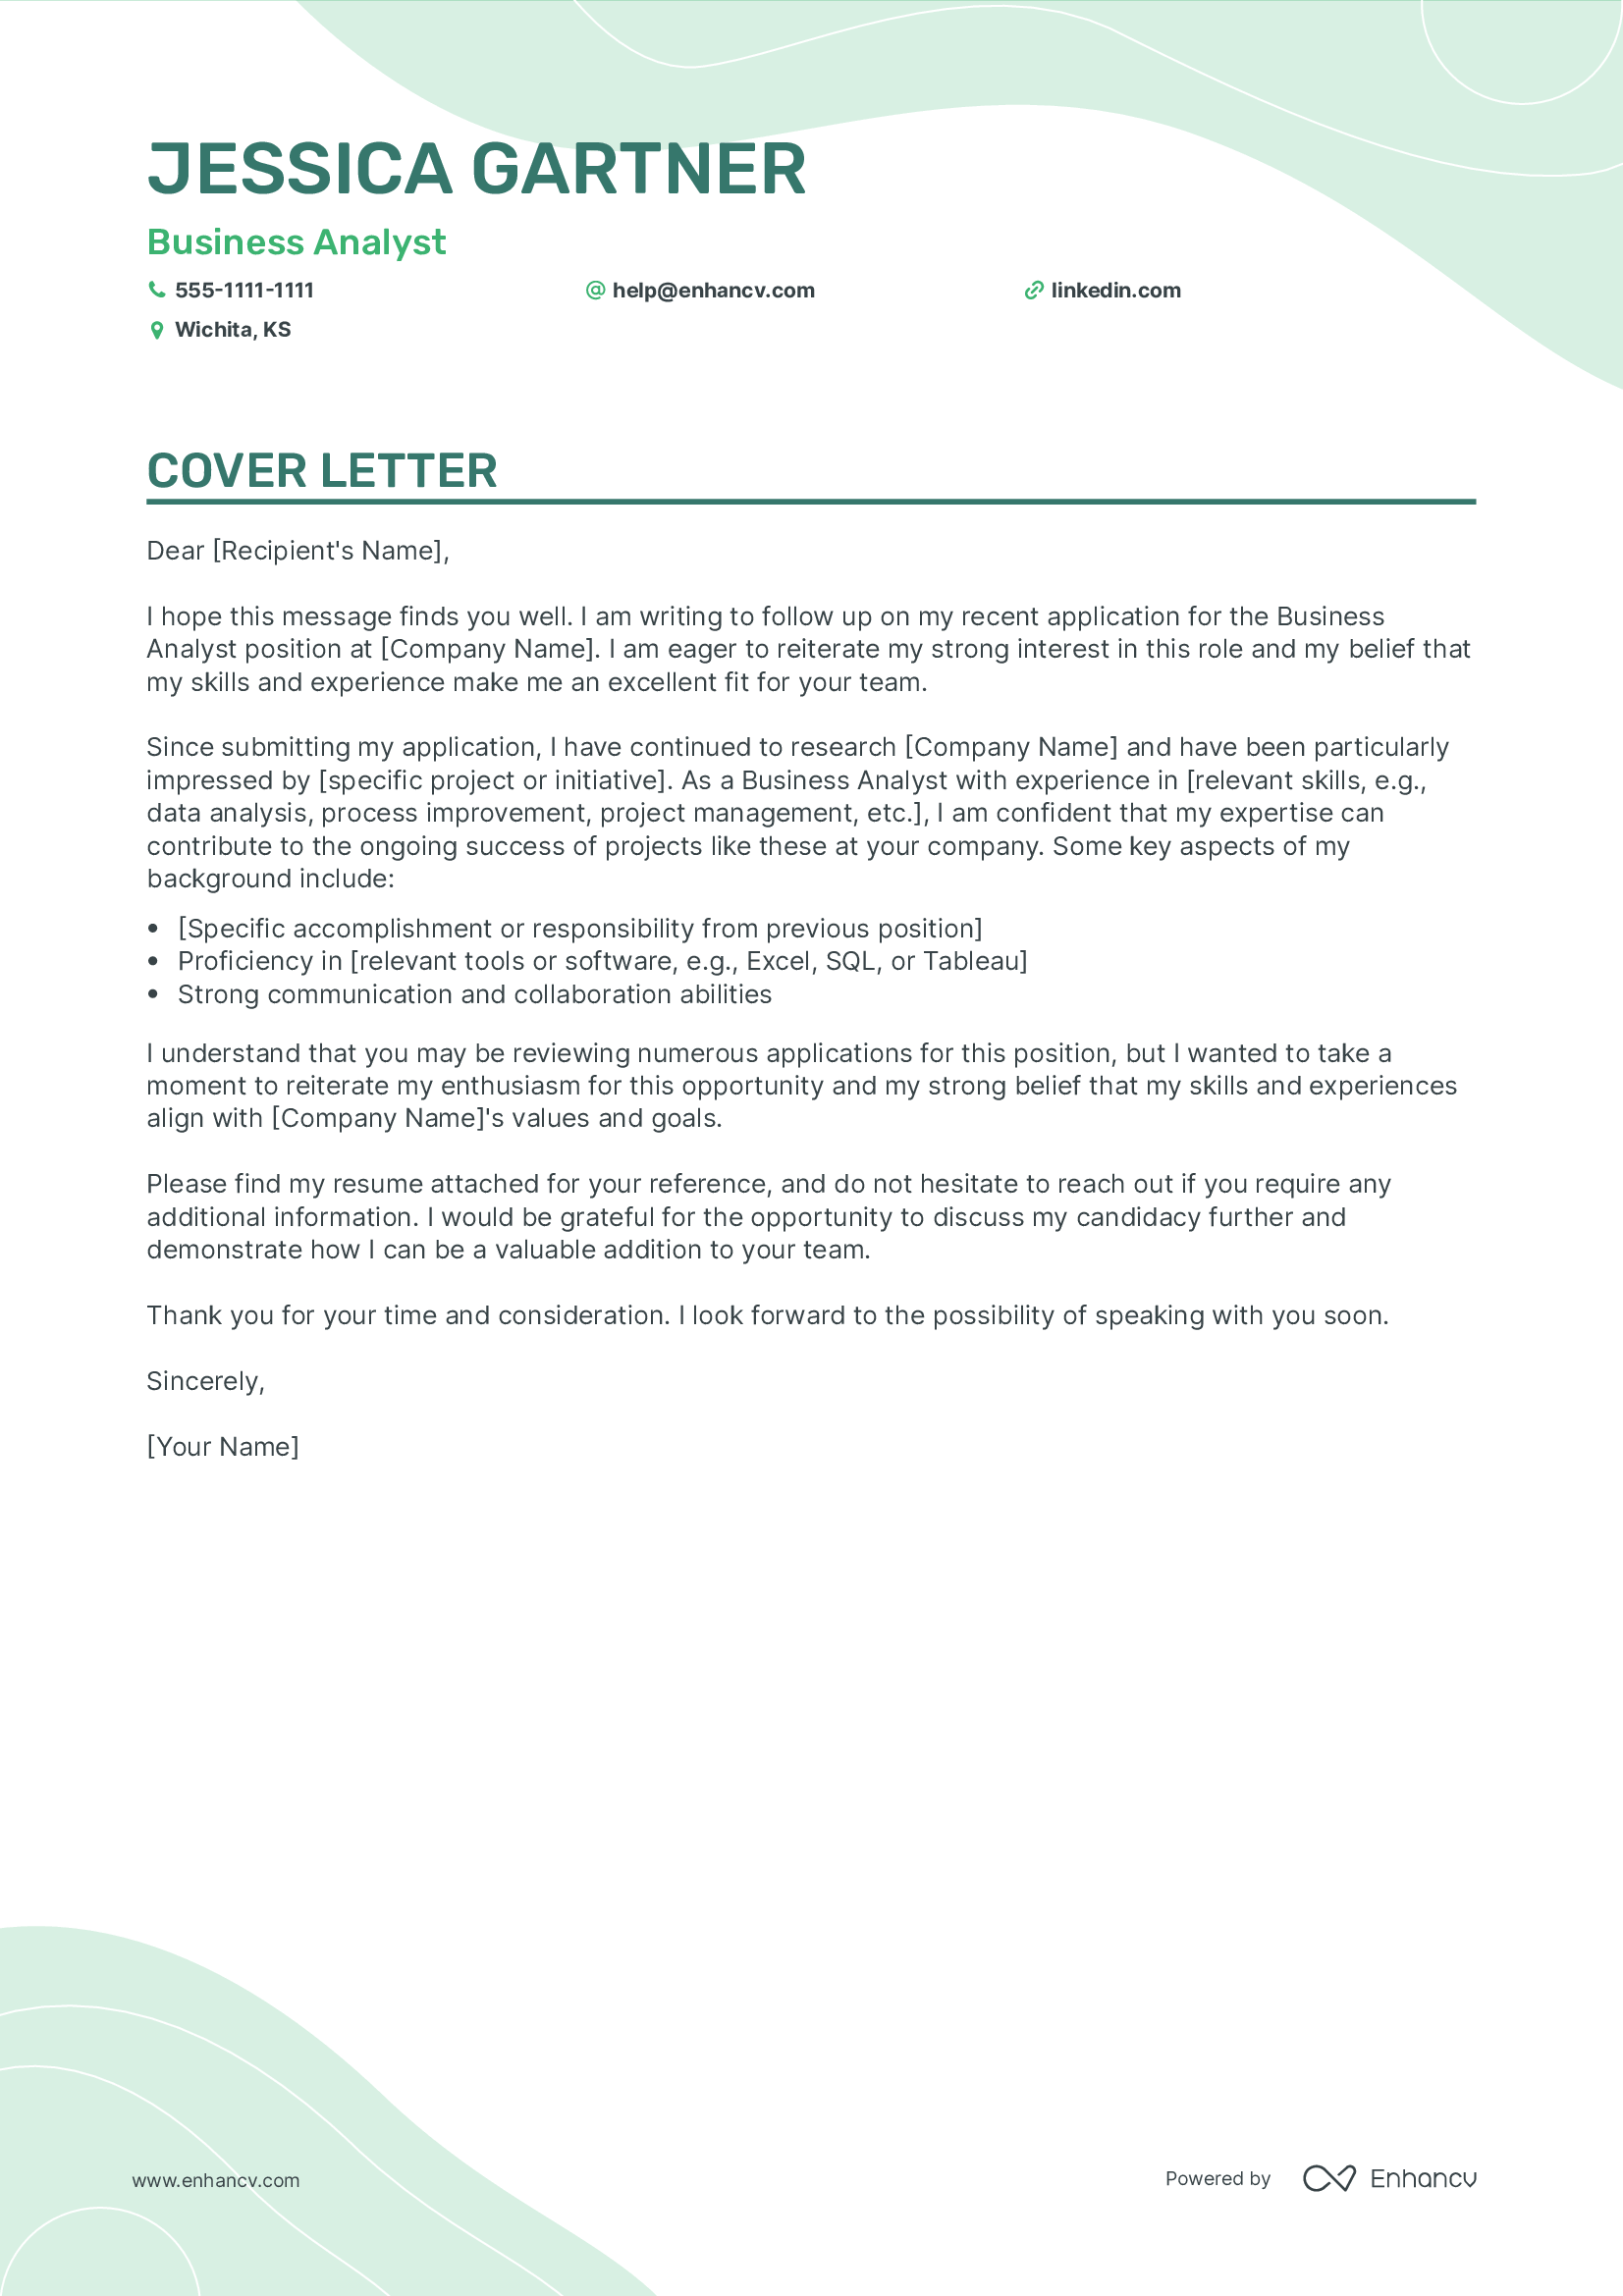 Tips on Writing a Short Cover Letter